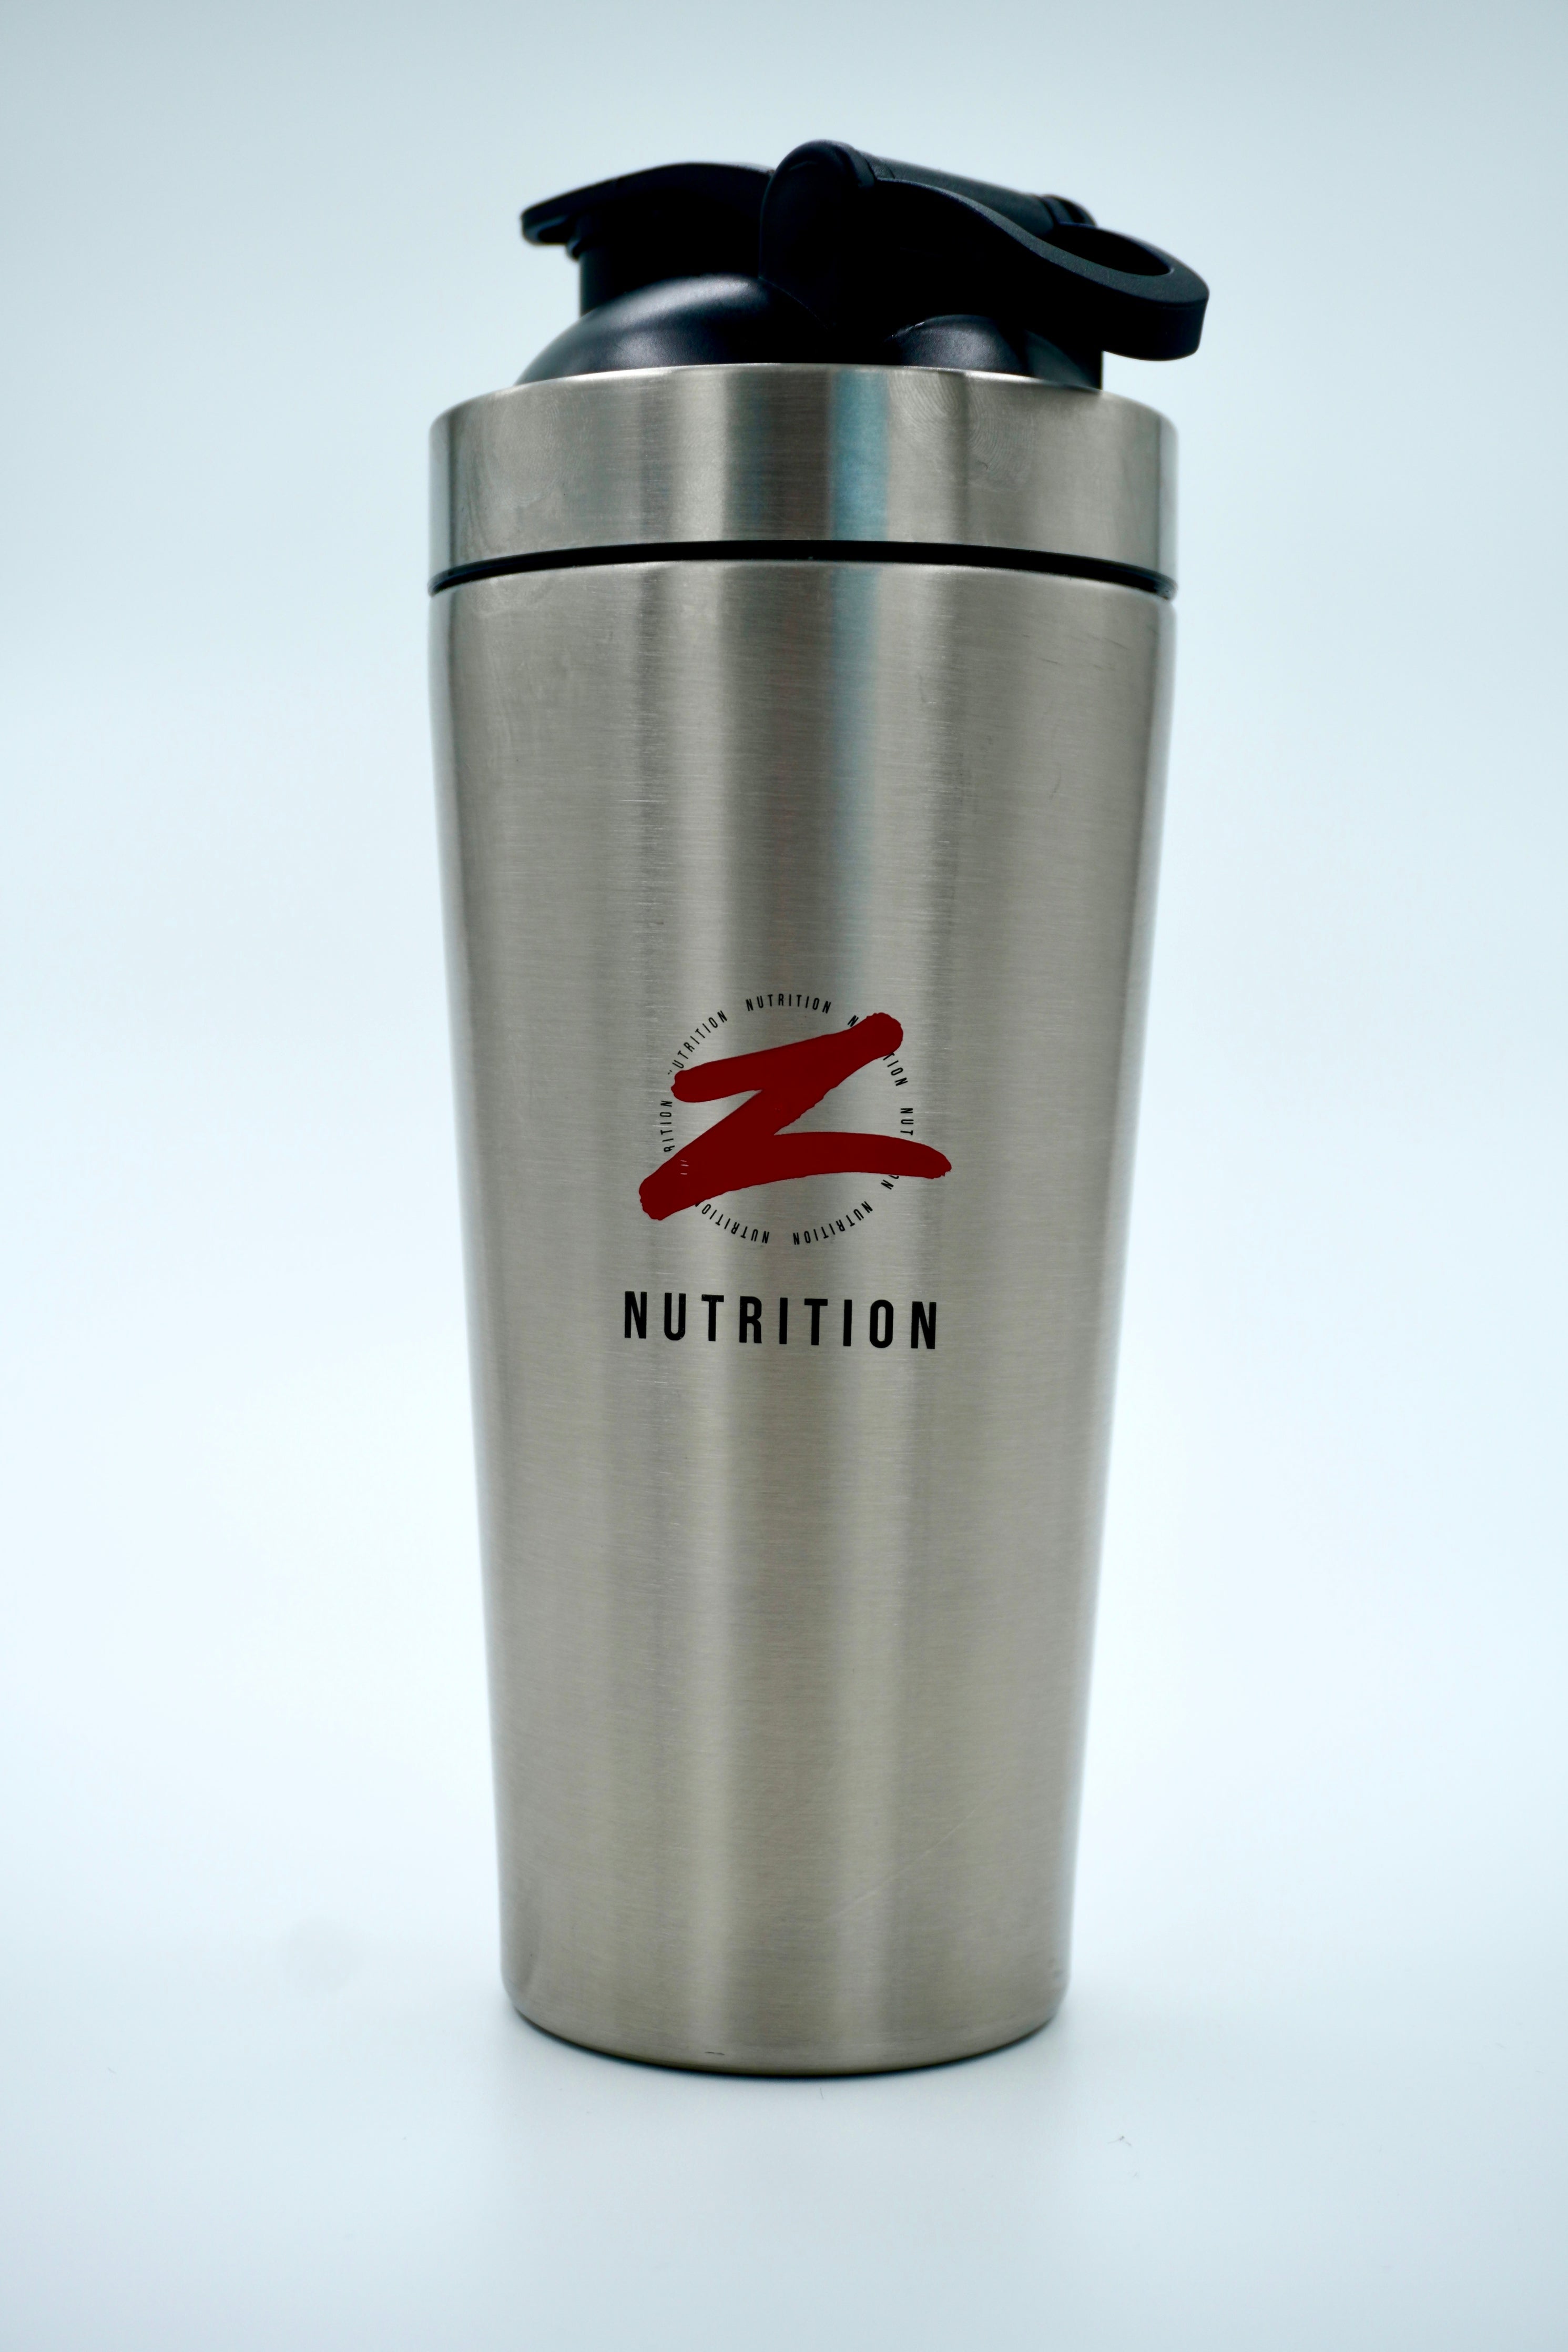 Z-Nutrition's RVS Thermo Shaker